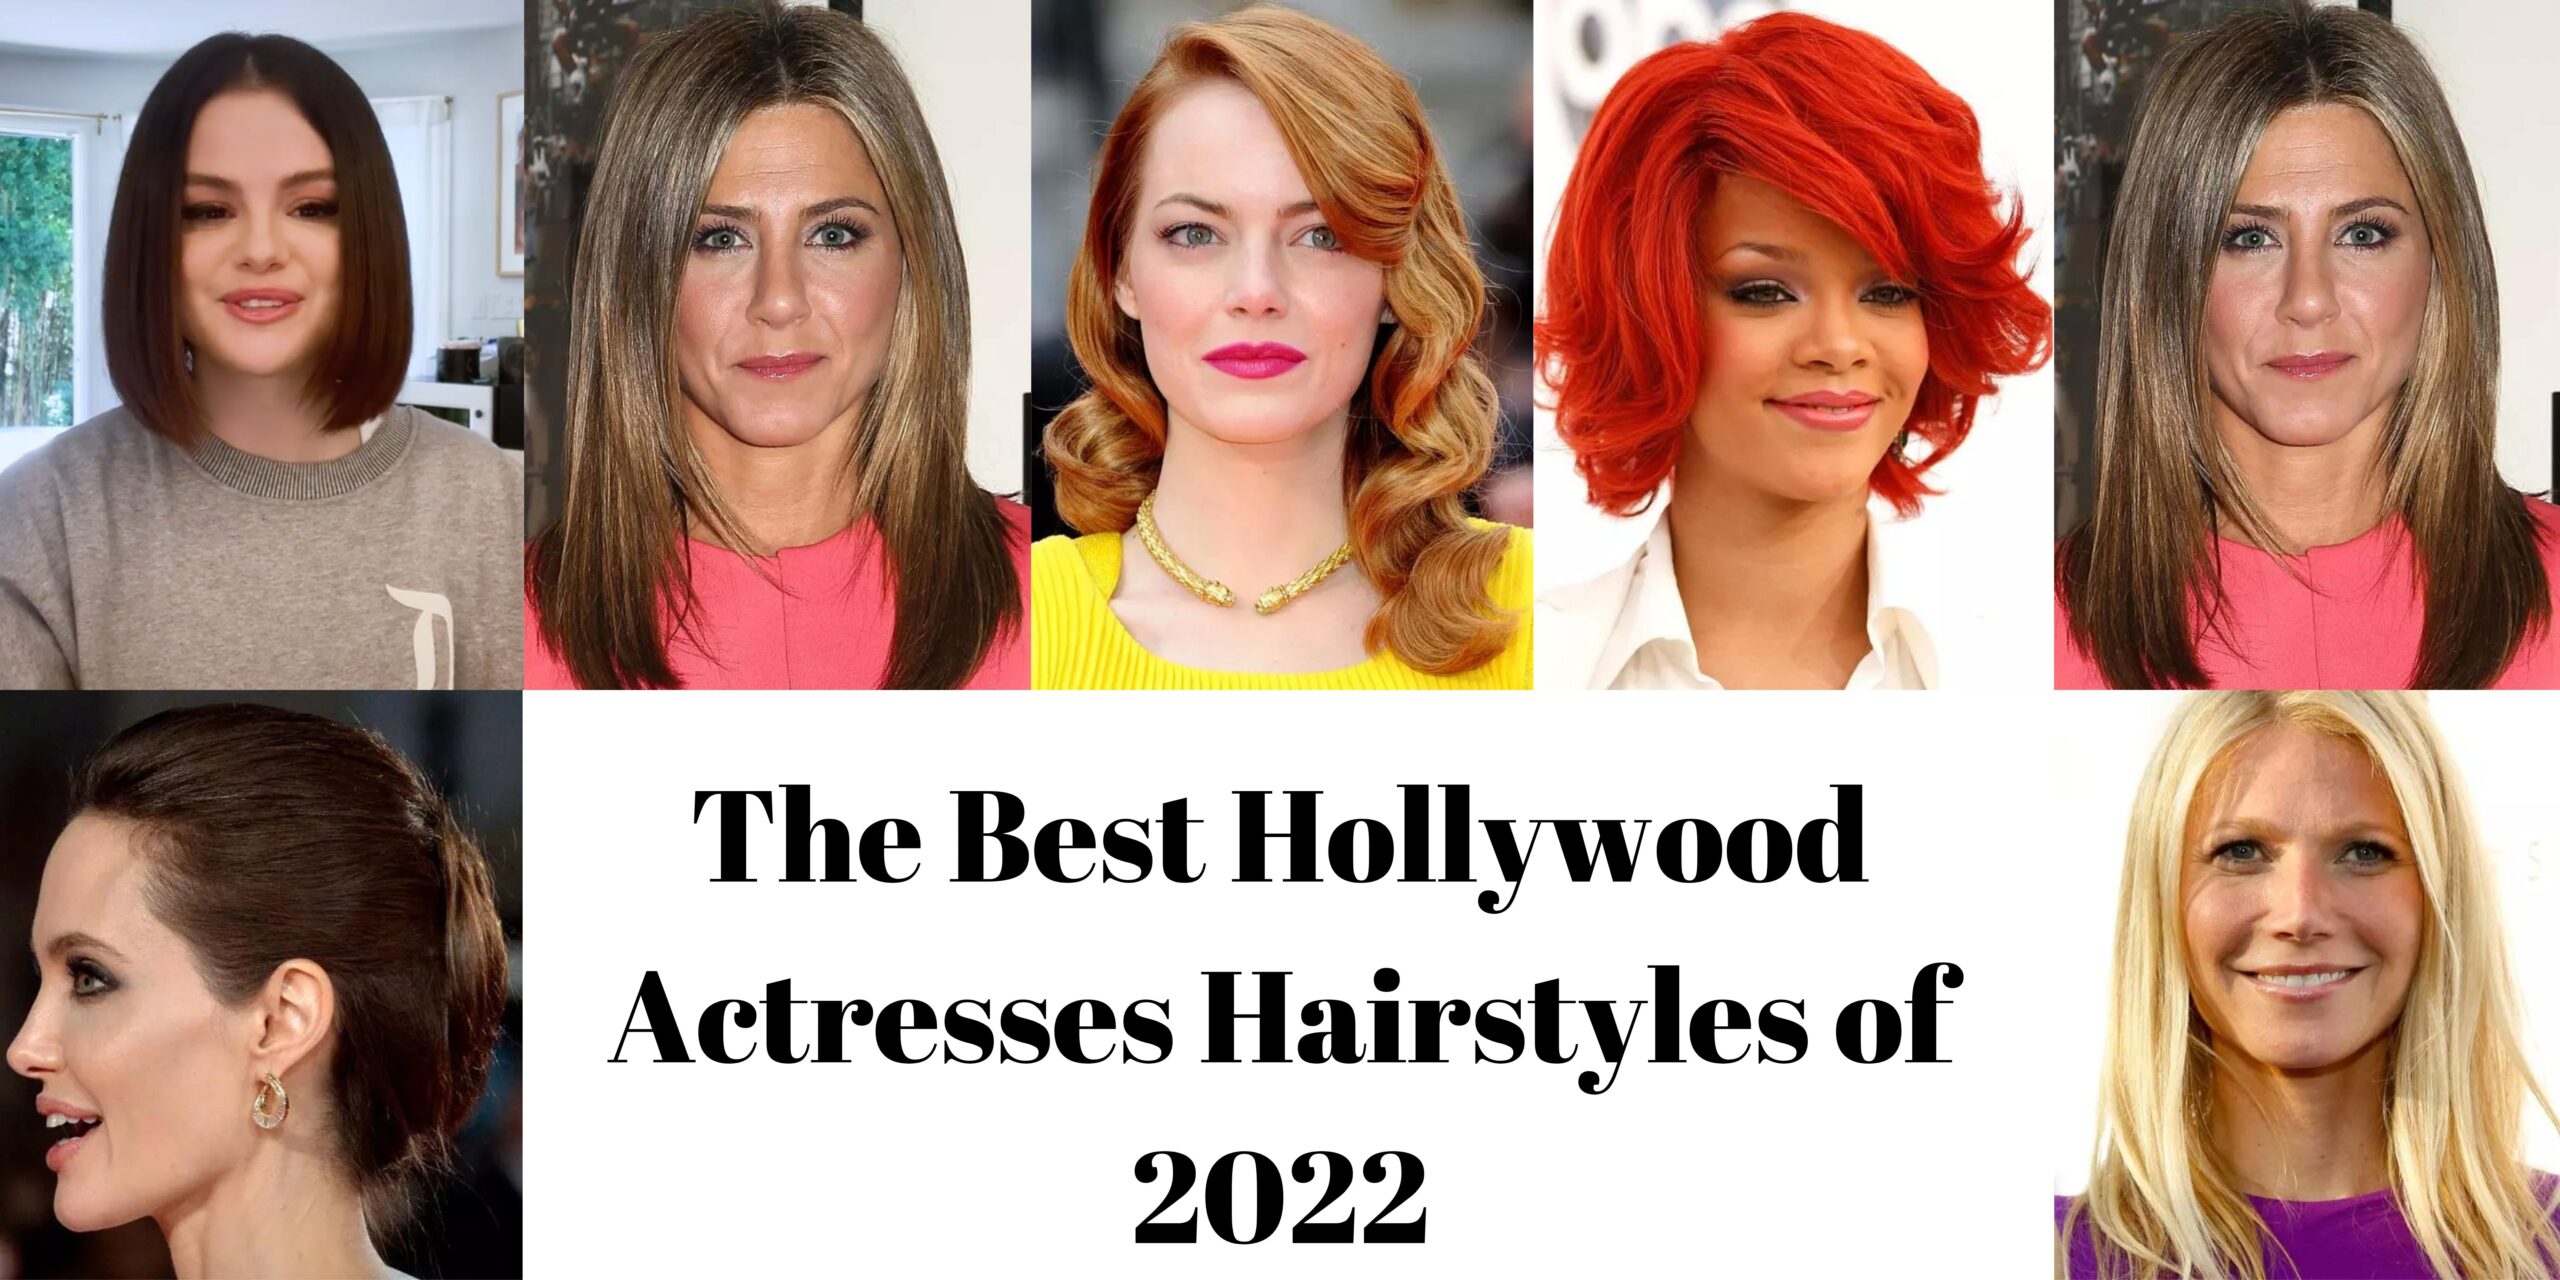 30 Most Iconic Celebrity Hairstyles of All Time